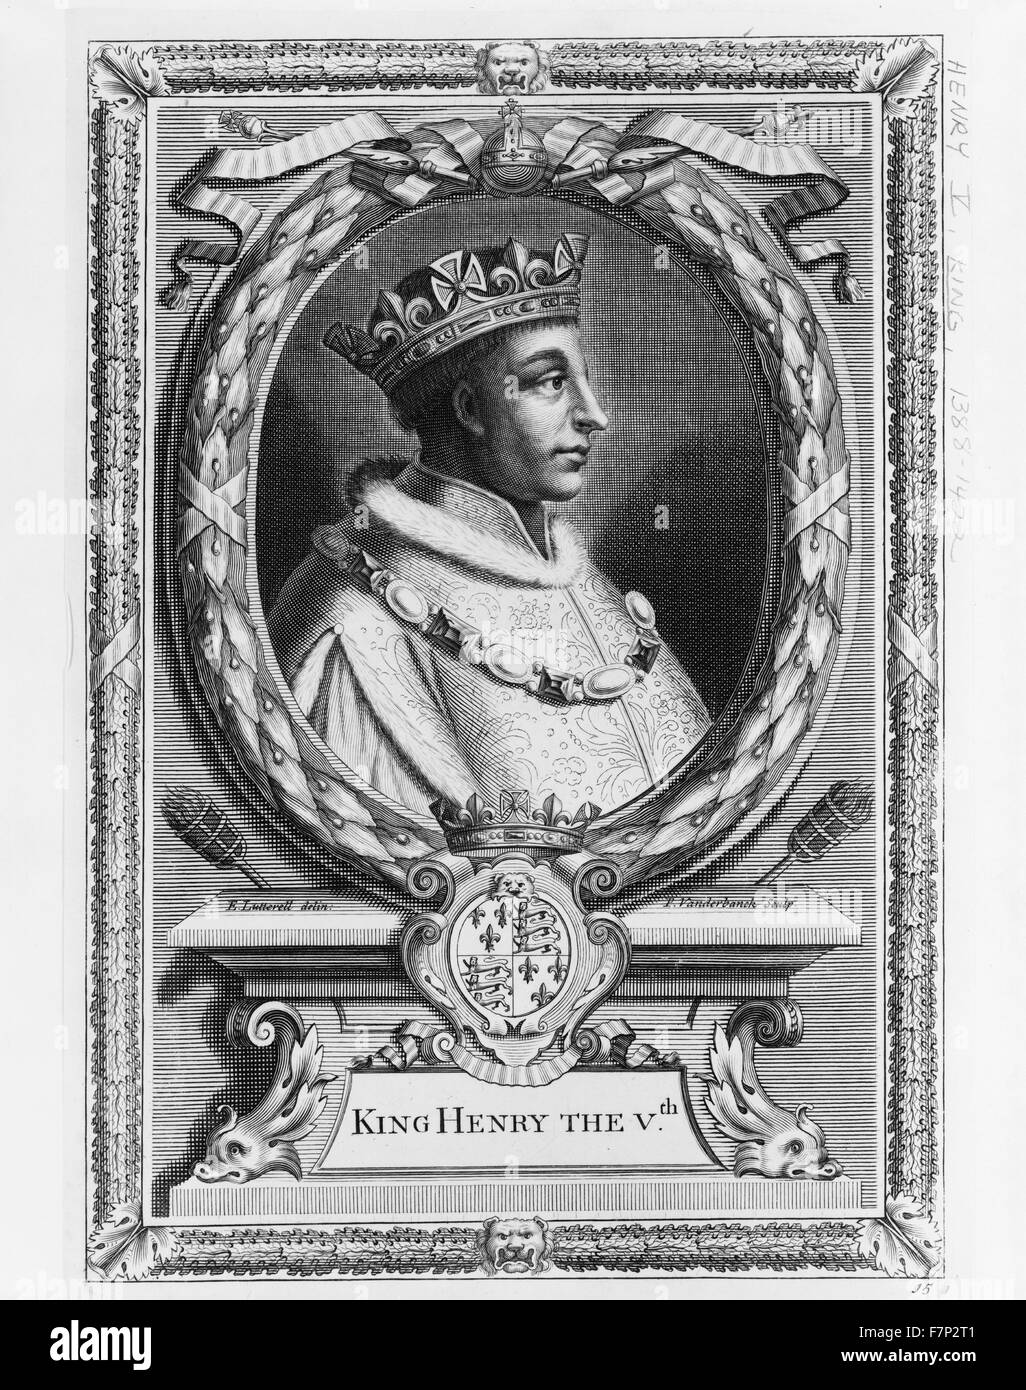 Illustration of King Henry V (1387-1422) King of England and second monarch from the House of Lancaster. Dated 1800 Stock Photo